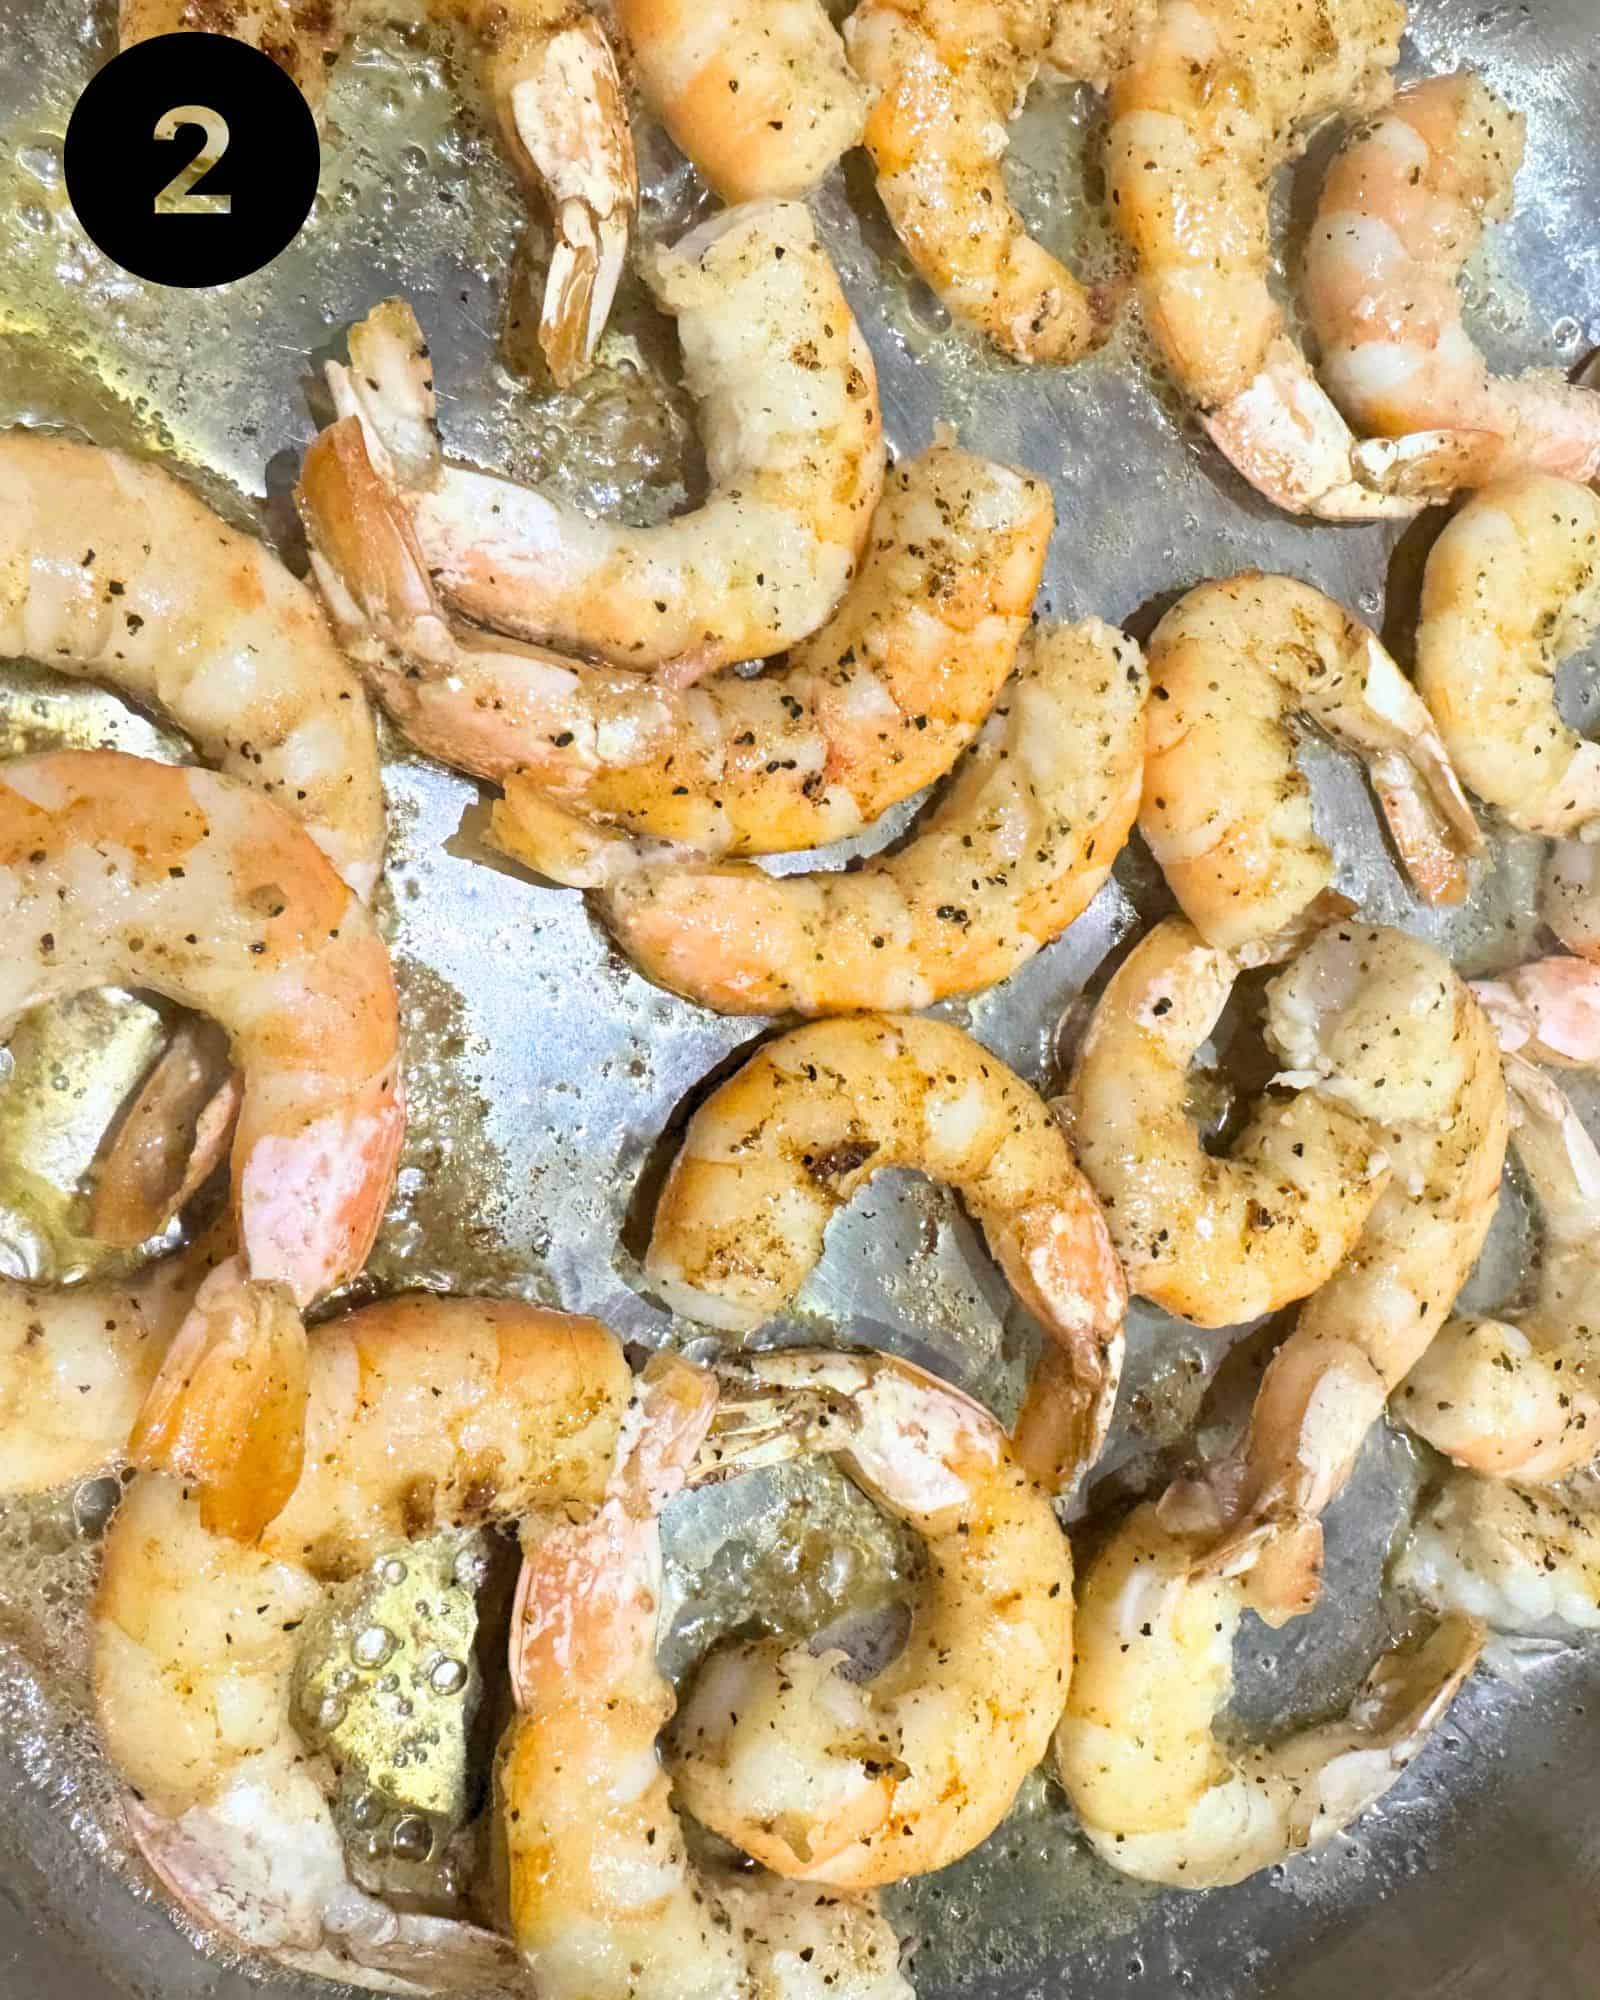 shrimp being cooked in a saute pan